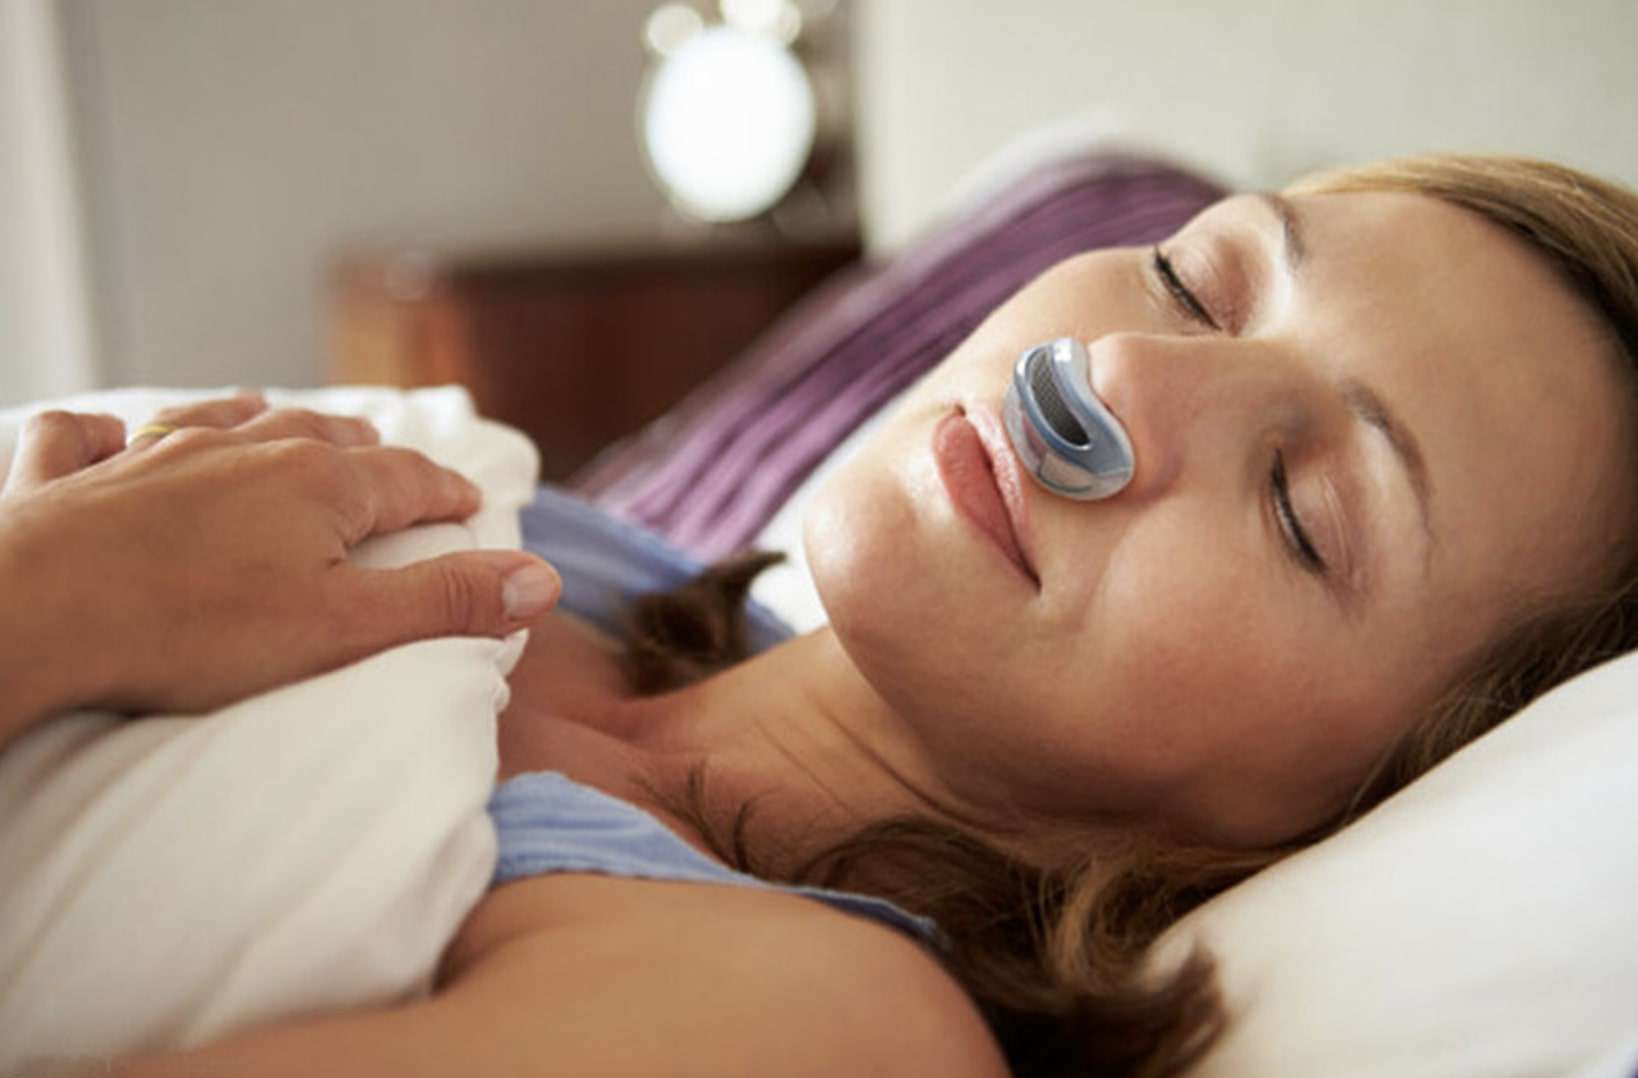 Taboola Ad Example 49893 - This Strange Anti-Snoring Device Is Beating All Sales Records